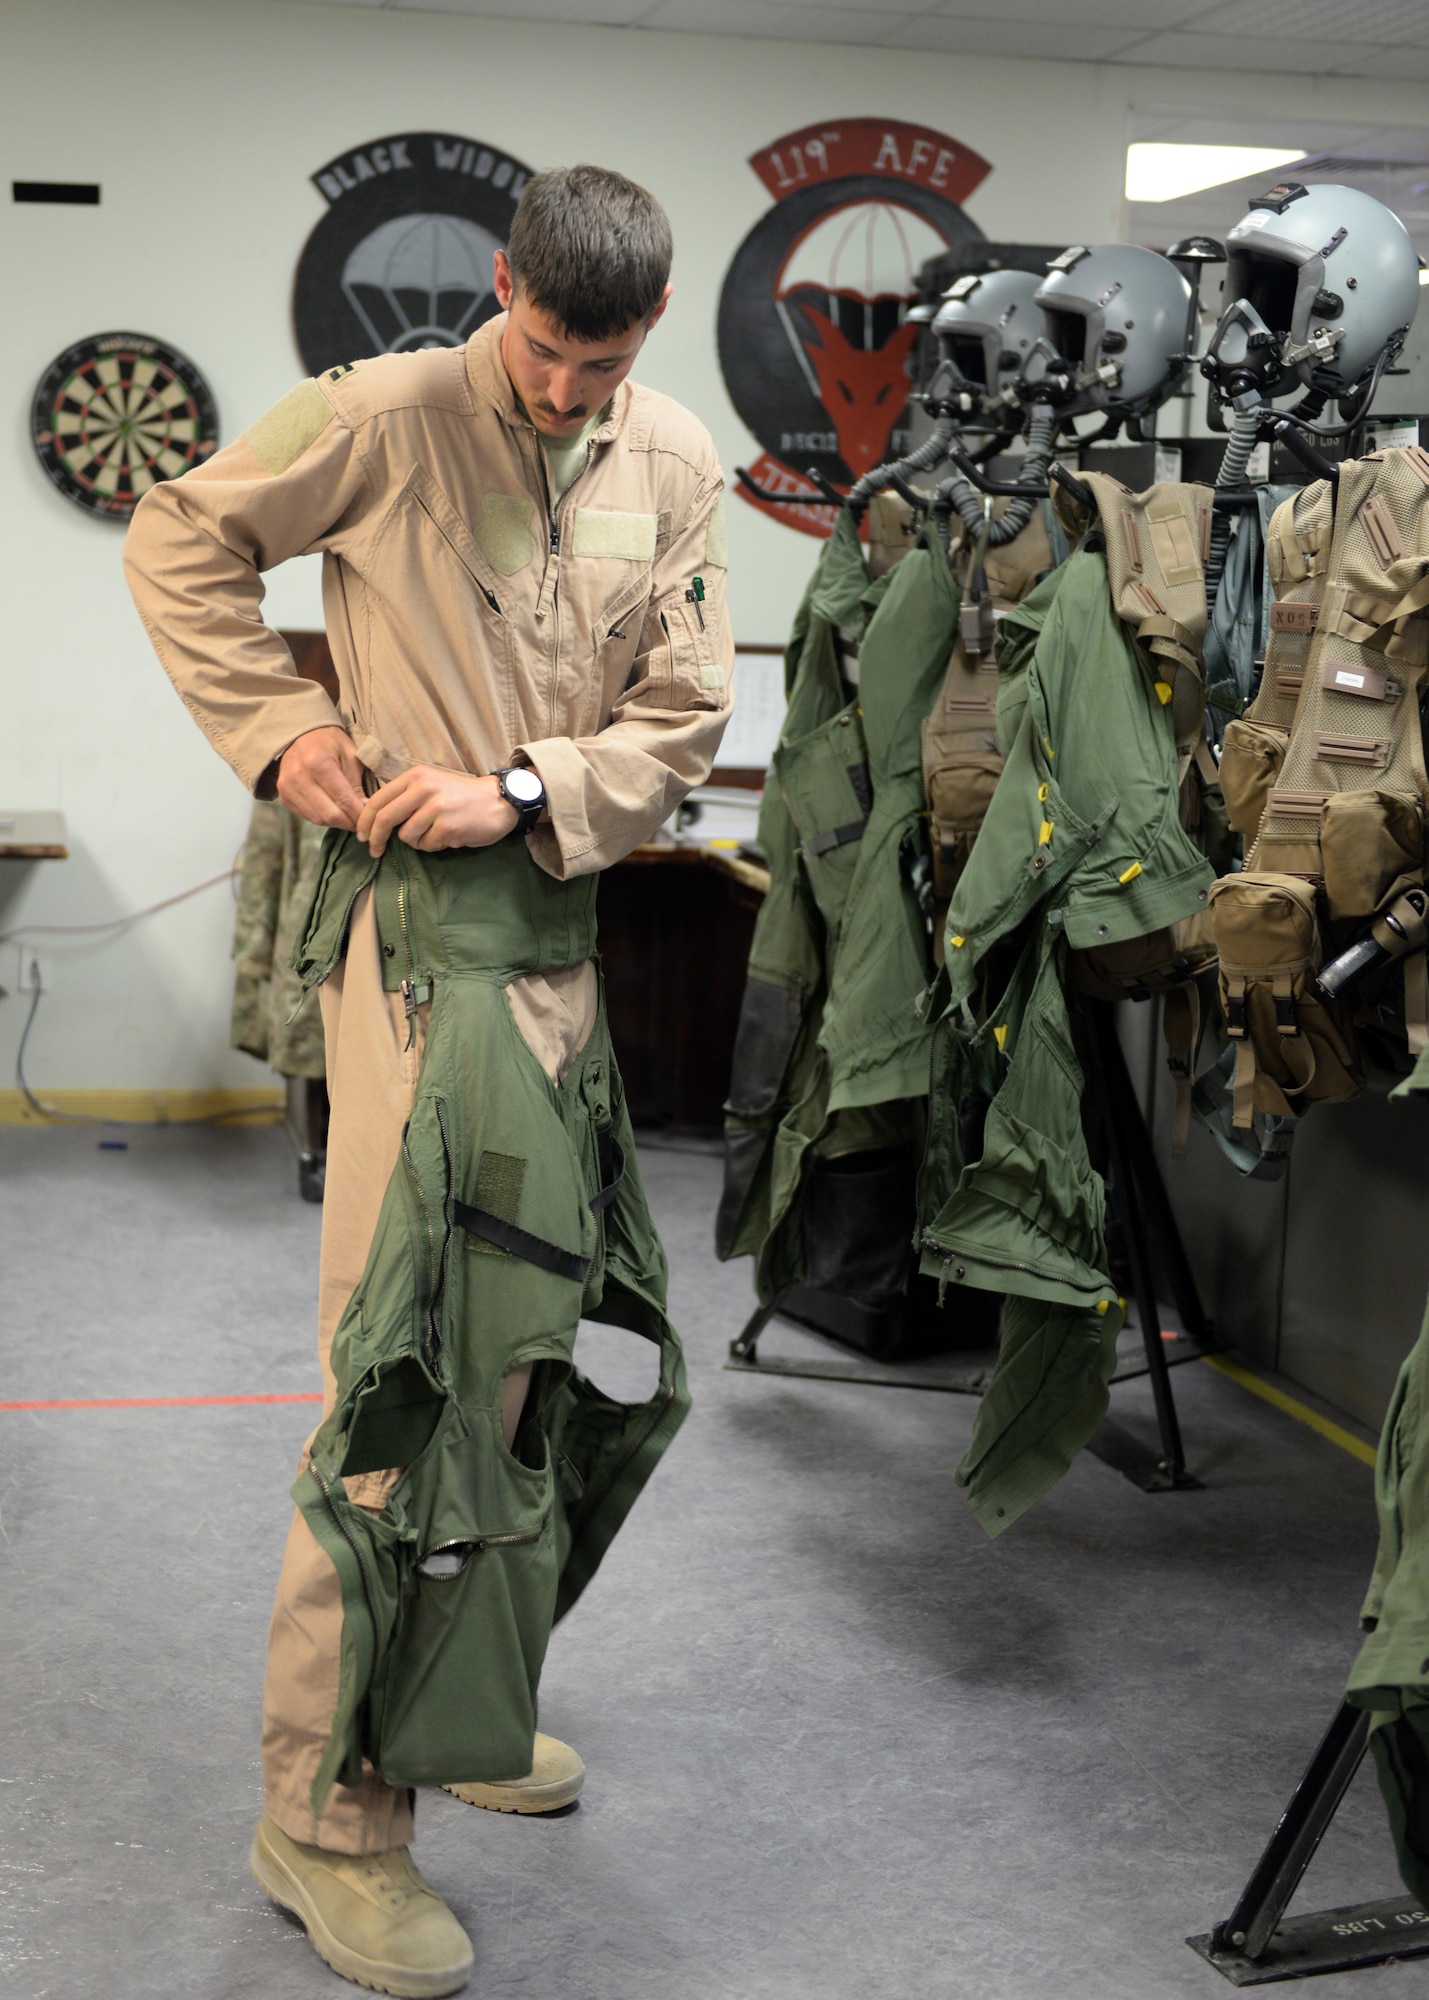 U.S. Air Force Capt. Dakota Olsen, 555th Expeditionary Fighter Squadron F-16 Fighting Falcon pilot, gears up before flying out on a mission June 17, 2015, at Bagram Airfield, Afghanistan.  Olsen’s job is to provide close air support and armed over watch for military personnel in Afghanistan. He flies various sorties and missions throughout the country on a daily basis providing airpower to ensure a safe and secure environment for personnel at BAF. (U.S. Air Force photo by Senior Airman Cierra Presentado/Released)